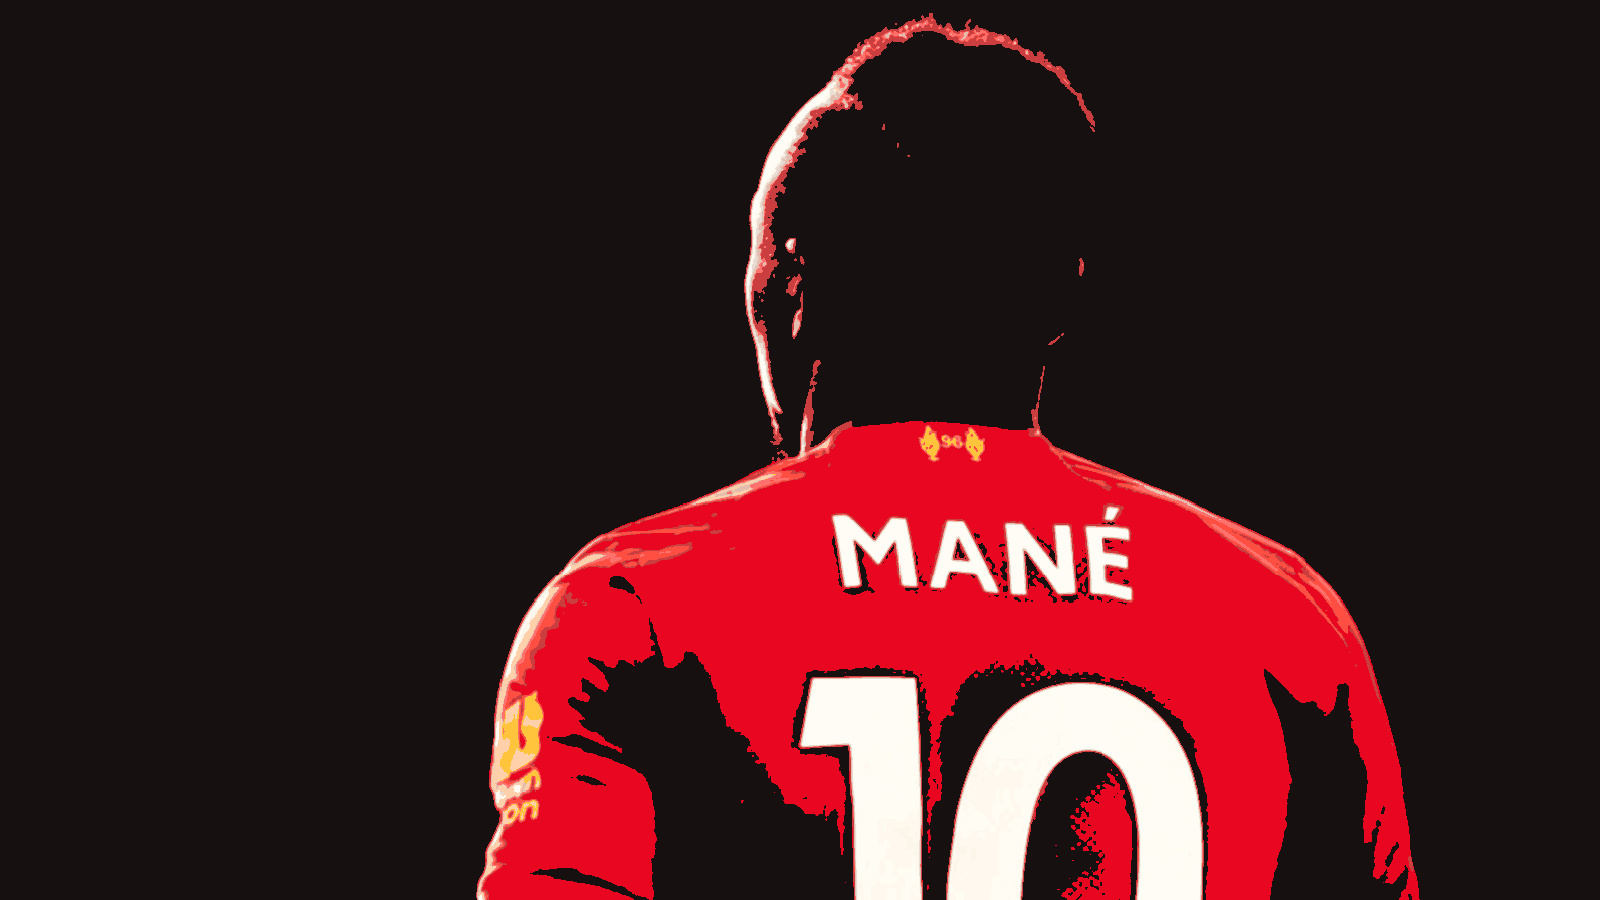 Sadio Mane in Liverpool kit with 10 at the back